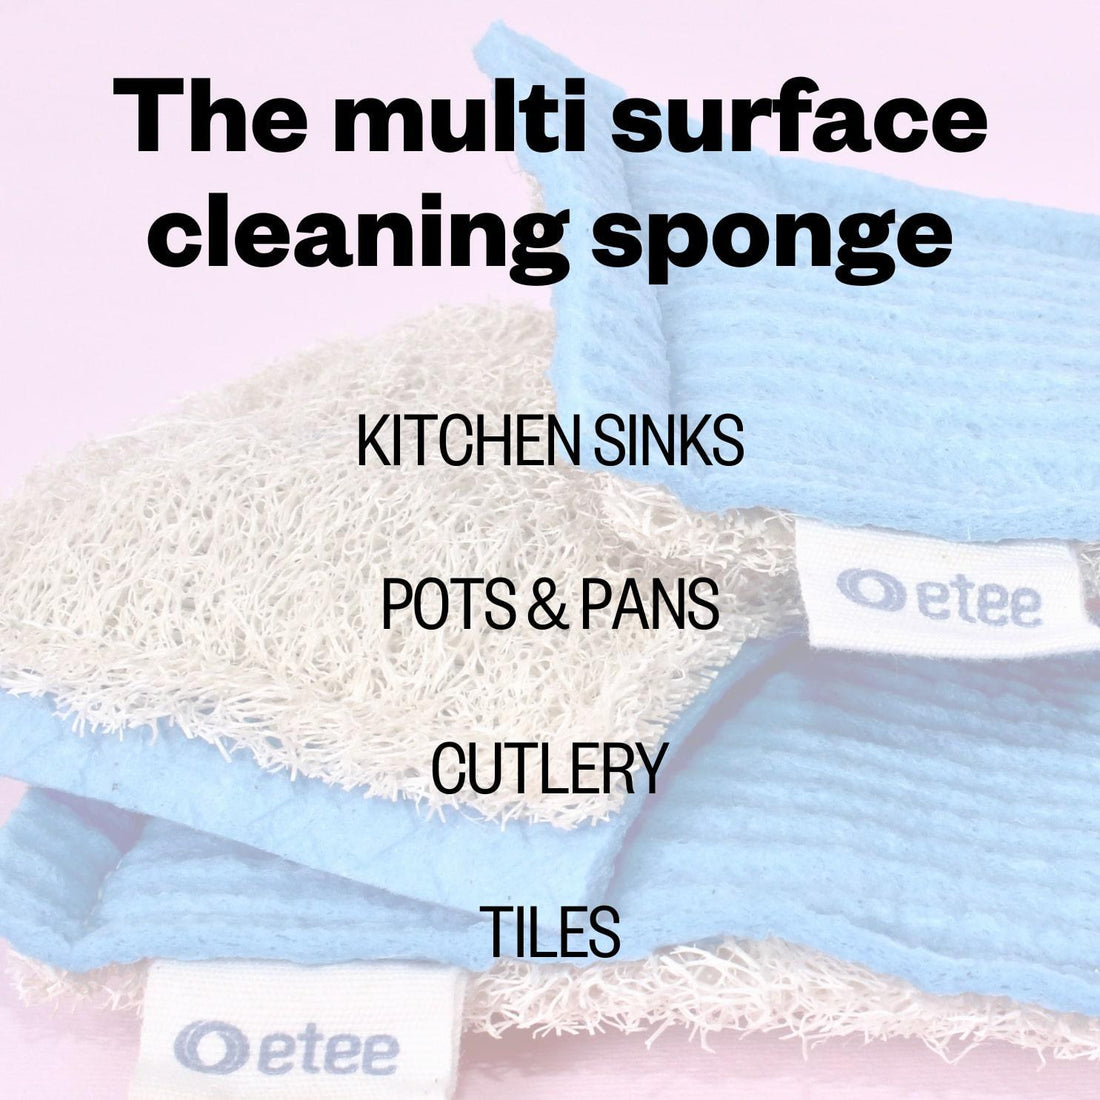 Infographic of etee loofie scrubber with heading "The multi surface cleaning sponge: kitchen sinks, pots and pans, cutlery, and tiles"